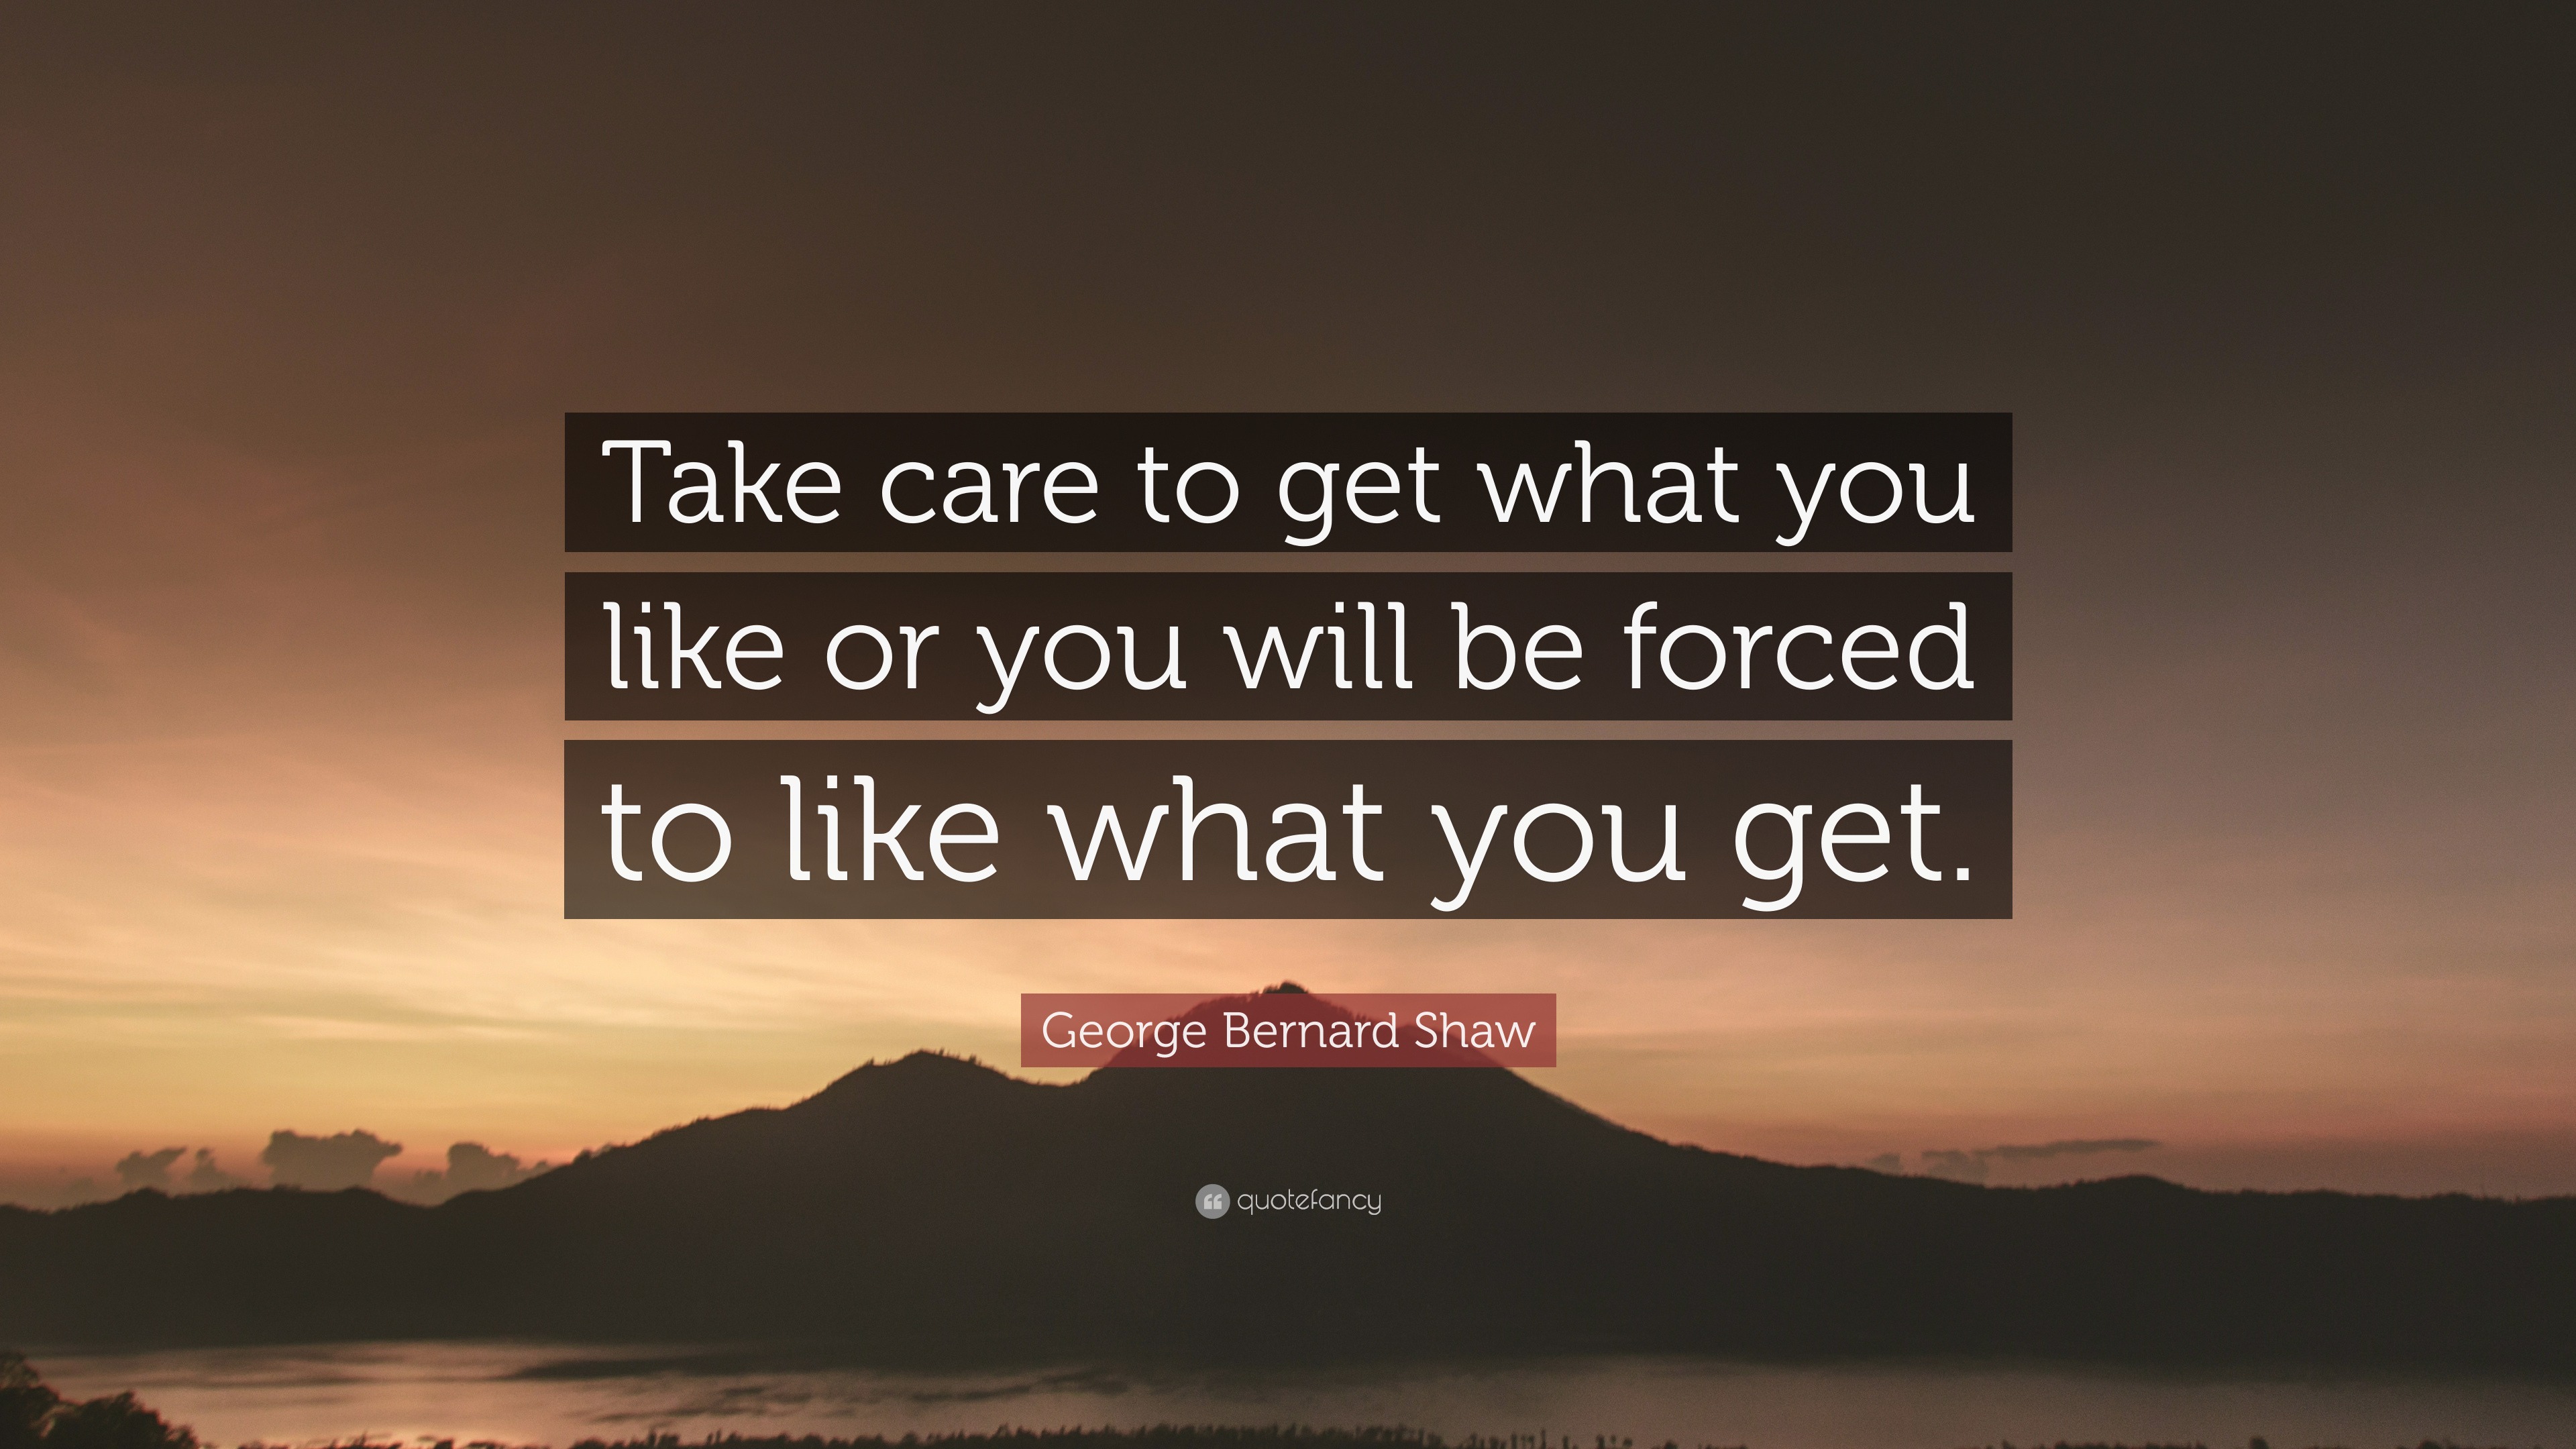 George Bernard Shaw Quote: “Take care to get what you like or you will ...